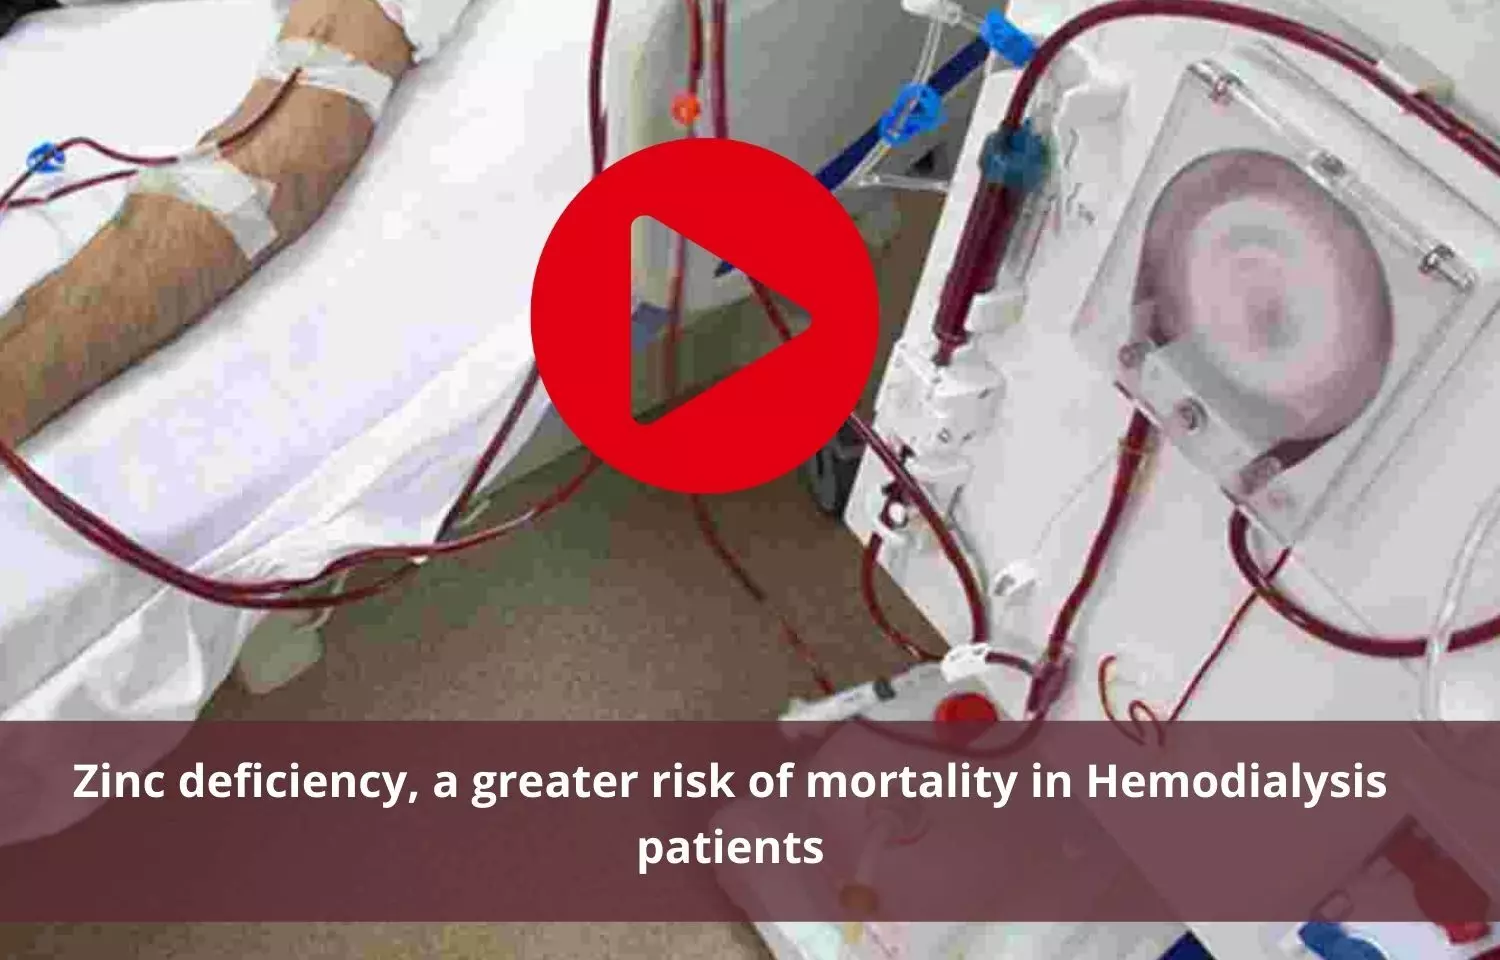 Zinc deficiency tied with higher risk of mortality in Hemodialysis patients